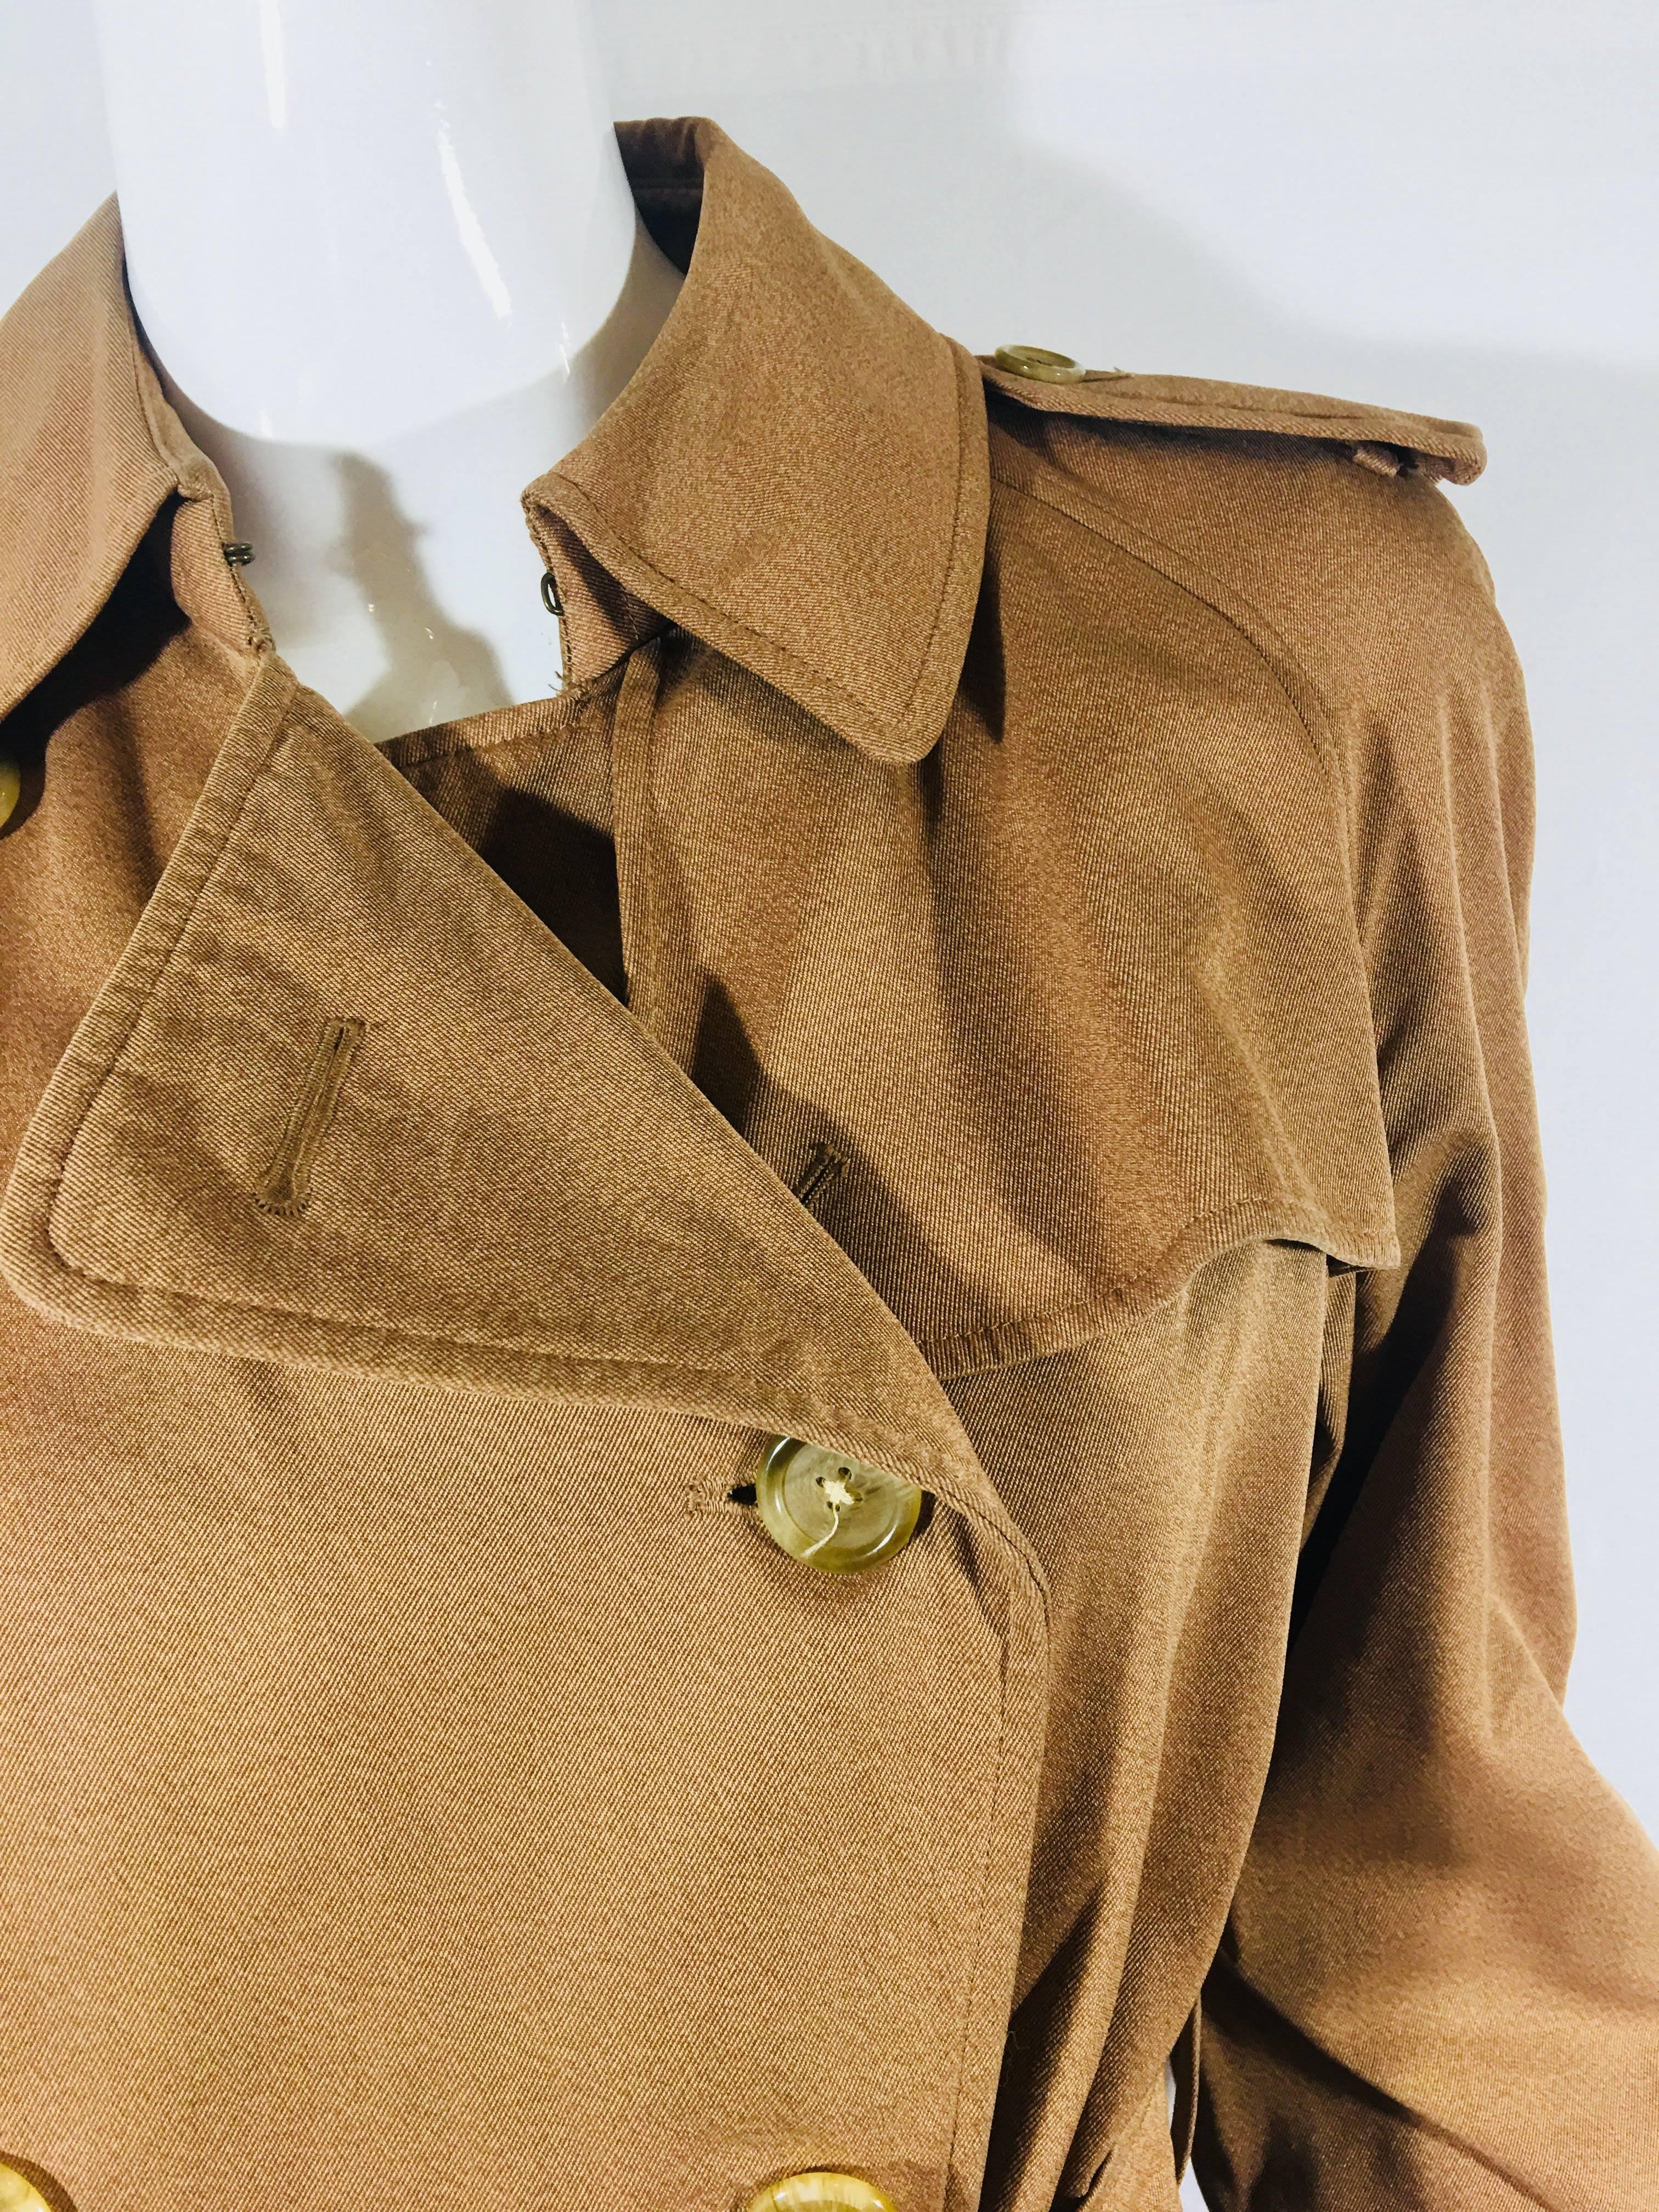 Women's or Men's Burberry Double Breasted Trench Coat